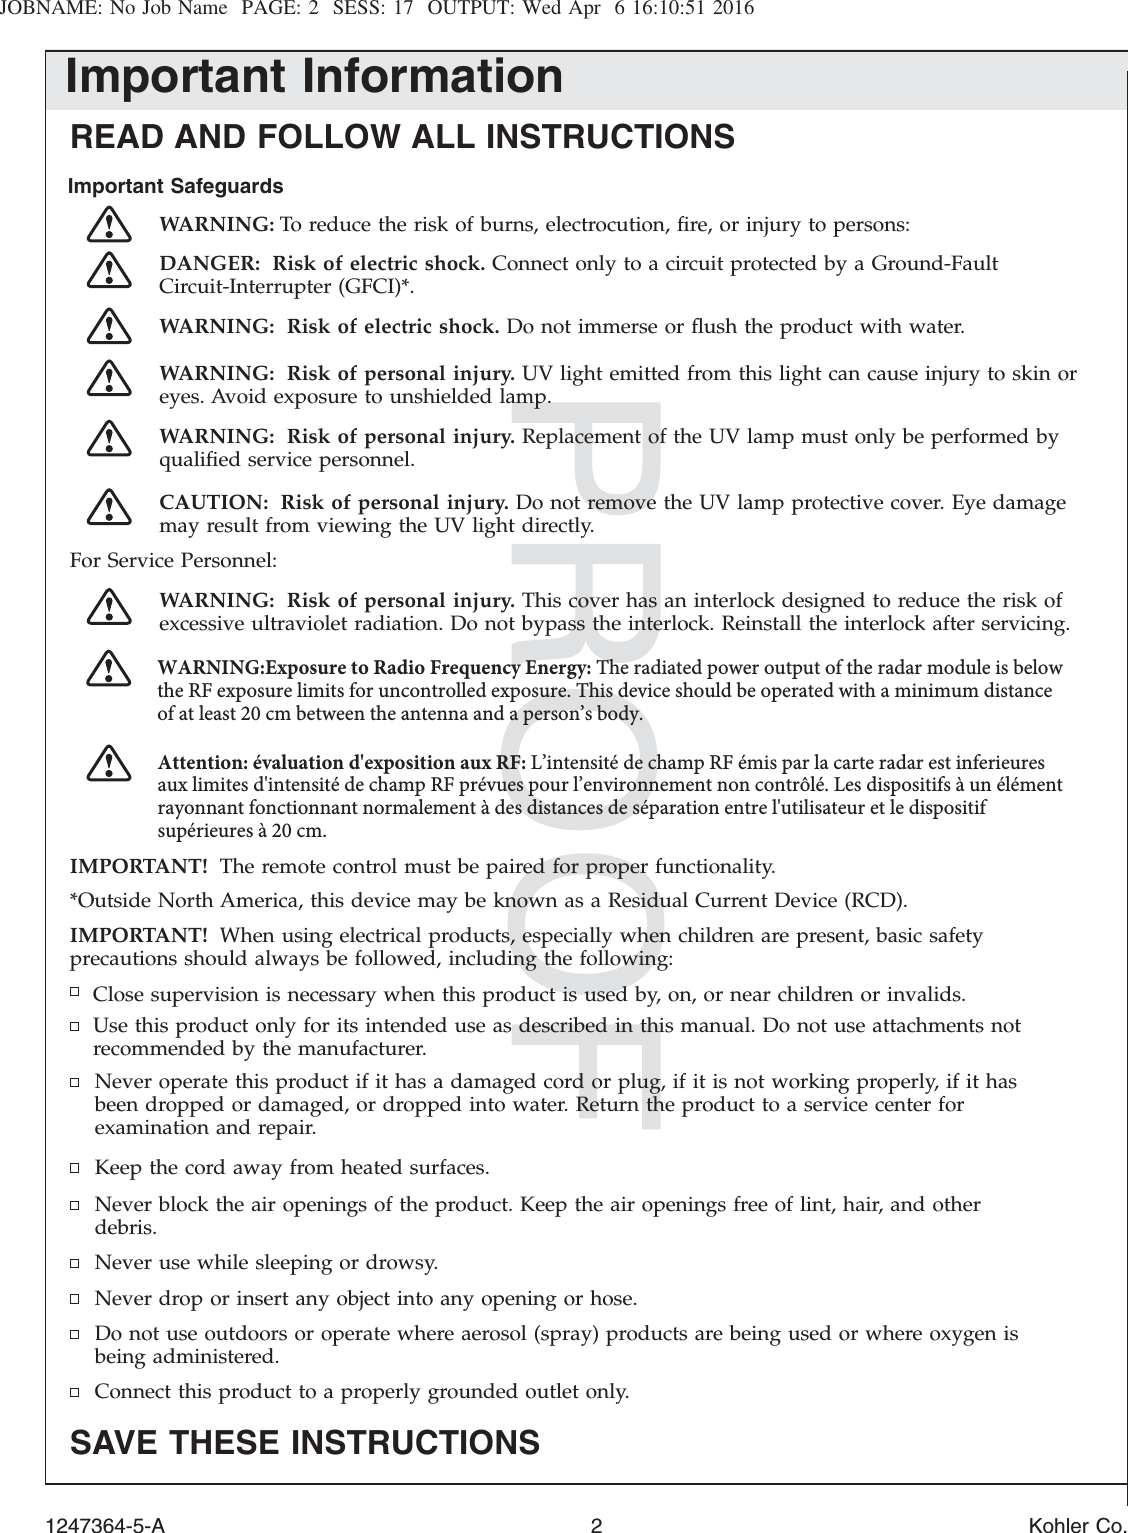 JOBNAME: No Job Name PAGE: 2 SESS: 17 OUTPUT: Wed Apr 6 16:10:51 2016Important InformationREAD AND FOLLOW ALL INSTRUCTIONSImportant SafeguardsWARNING: To reduce the risk of burns, electrocution, ﬁre, or injury to persons:DANGER: Risk of electric shock. Connect only to a circuit protected by a Ground-FaultCircuit-Interrupter (GFCI)*.WARNING: Risk of electric shock. Do not immerse or ﬂush the product with water.WARNING: Risk of personal injury. UV light emitted from this light can cause injury to skin oreyes. Avoid exposure to unshielded lamp.WARNING: Risk of personal injury. Replacement of the UV lamp must only be performed byqualiﬁed service personnel.CAUTION: Risk of personal injury. Do not remove the UV lamp protective cover. Eye damagemay result from viewing the UV light directly.For Service Personnel:WARNING: Risk of personal injury. This cover has an interlock designed to reduce the risk ofexcessive ultraviolet radiation. Do not bypass the interlock. Reinstall the interlock after servicing.IMPORTANT! The remote control must be paired for proper functionality.*Outside North America, this device may be known as a Residual Current Device (RCD).IMPORTANT! When using electrical products, especially when children are present, basic safetyprecautions should always be followed, including the following:Close supervision is necessary when this product is used by, on, or near children or invalids.Use this product only for its intended use as described in this manual. Do not use attachments notrecommended by the manufacturer.Never operate this product if it has a damaged cord or plug, if it is not working properly, if it hasbeen dropped or damaged, or dropped into water. Return the product to a service center forexamination and repair.Keep the cord away from heated surfaces.Never block the air openings of the product. Keep the air openings free of lint, hair, and otherdebris.Never use while sleeping or drowsy.Never drop or insert any object into any opening or hose.Do not use outdoors or operate where aerosol (spray) products are being used or where oxygen isbeing administered.Connect this product to a properly grounded outlet only.SAVE THESE INSTRUCTIONS1247364-5-A 2 Kohler Co.WARNING:Exposure to Radio Frequency Energy: The radiated power output of the radar module is below the RF exposure limits for uncontrolled exposure. This device should be operated with a minimum distance of at least 20 cm between the antenna and a person’s body.Attention: évaluation d&apos;exposition aux RF: L’intensité de champ RF émis par la carte radar est inferieures aux limites d&apos;intensité de champ RF prévues pour l’environnement non contrôlé. Les dispositifs à un élément rayonnant fonctionnant normalement à des distances de séparation entre l&apos;utilisateur et le dispositif supérieures à 20 cm.